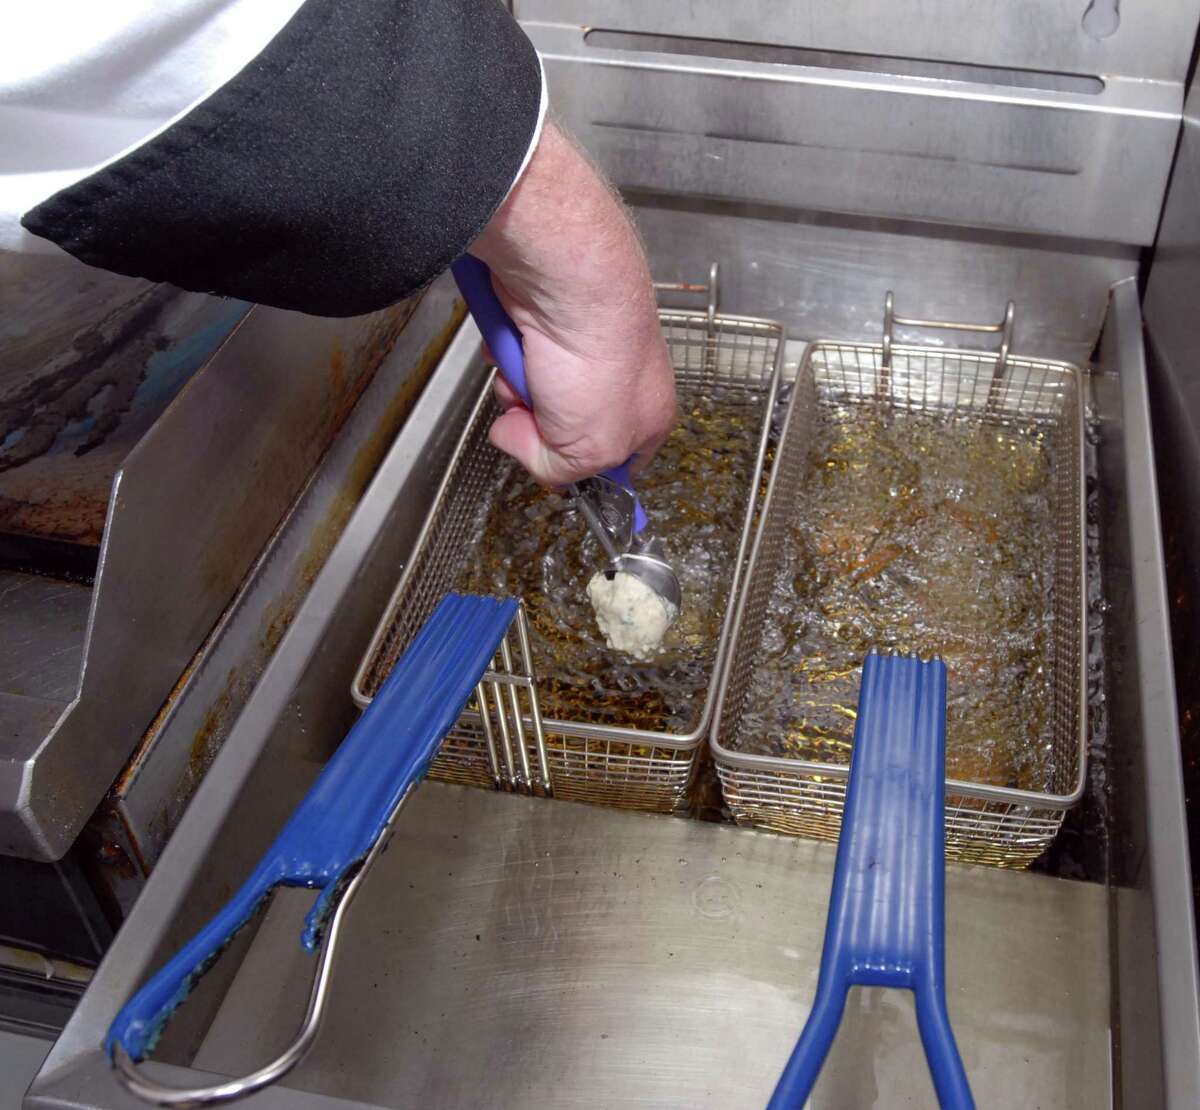 4/6/10 3Fritters ML0601B Joe Collier owner and executive chef of the Savin Rock Roasting Company drops a ball of clam fritter batter into the fryer at his West Haven restaurant. Photo by Mara Lavitt